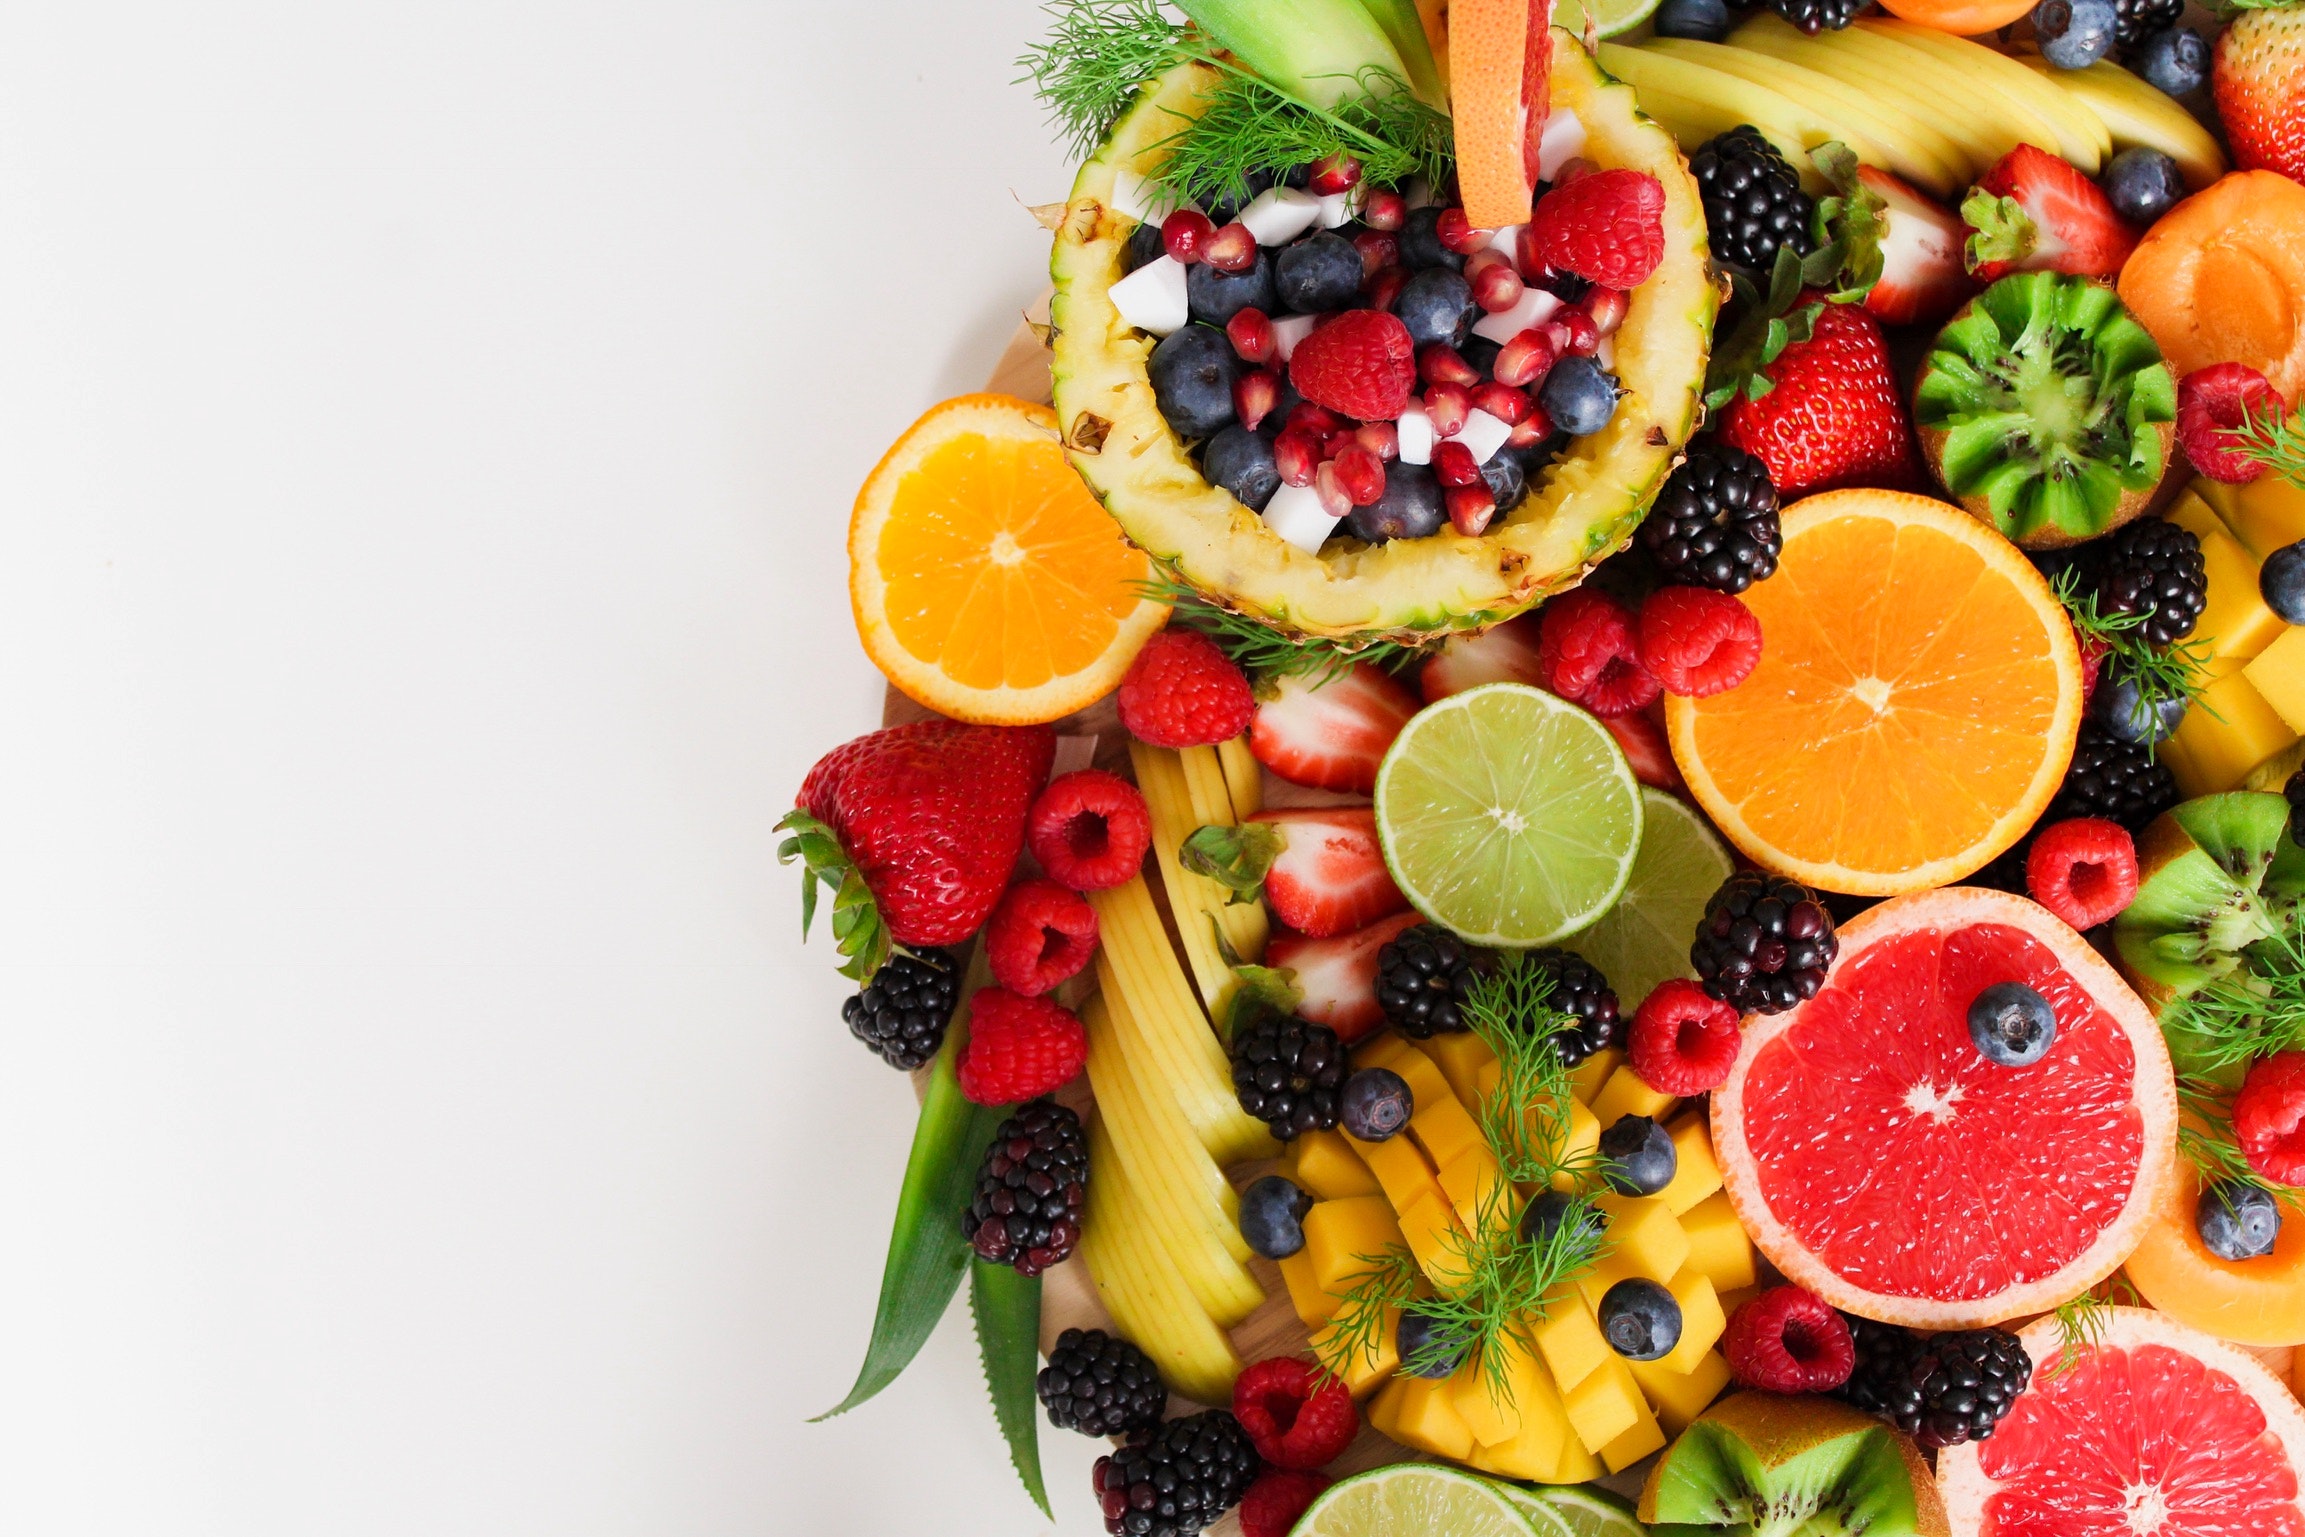 Eating Fruit is Linked to Improved Mental Health, Studies Show